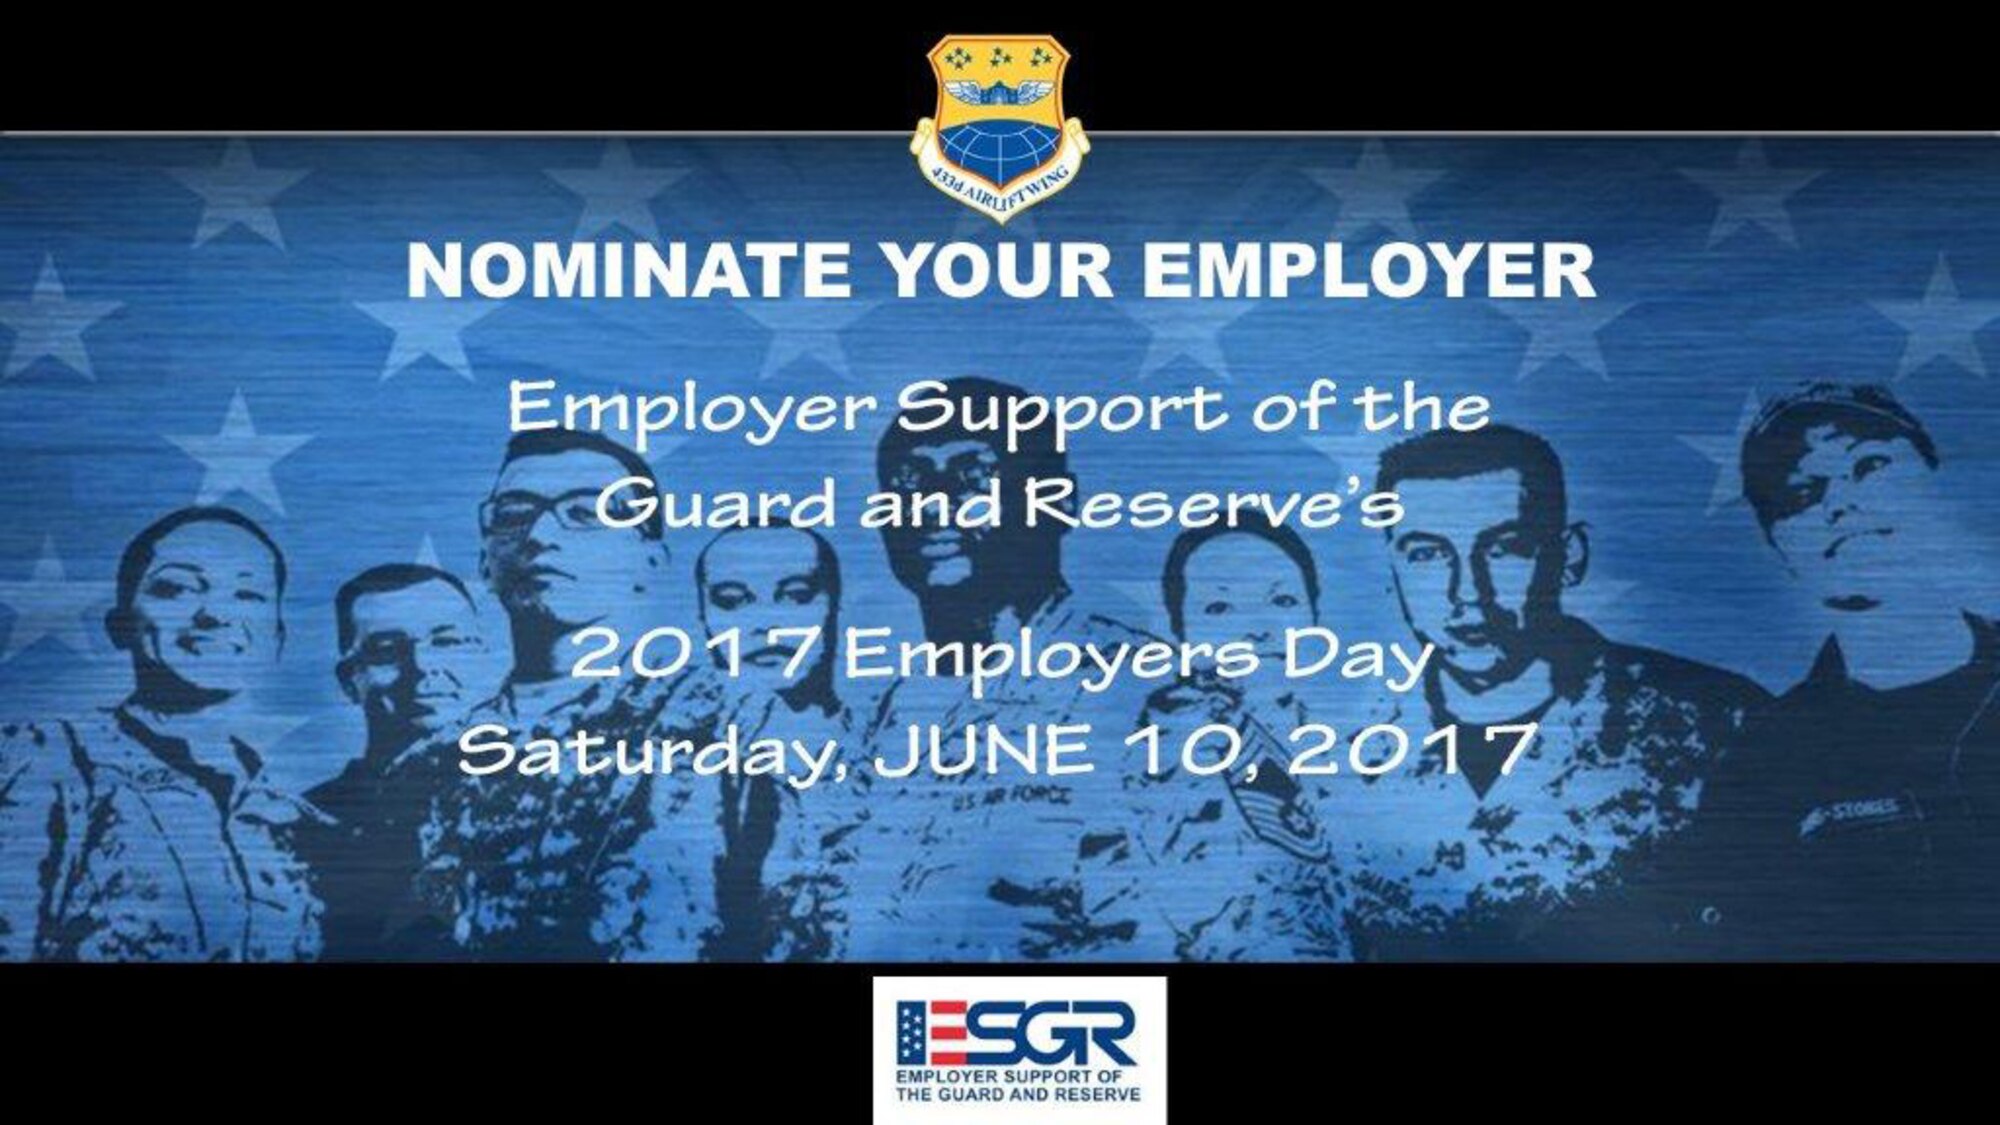 Nominate your employer. Employer Support of the Guard and Reserve's, 2017 Employers Day Saturday, June 10, 2017. (U.S. Air Force Graphic by Minnie Jones)